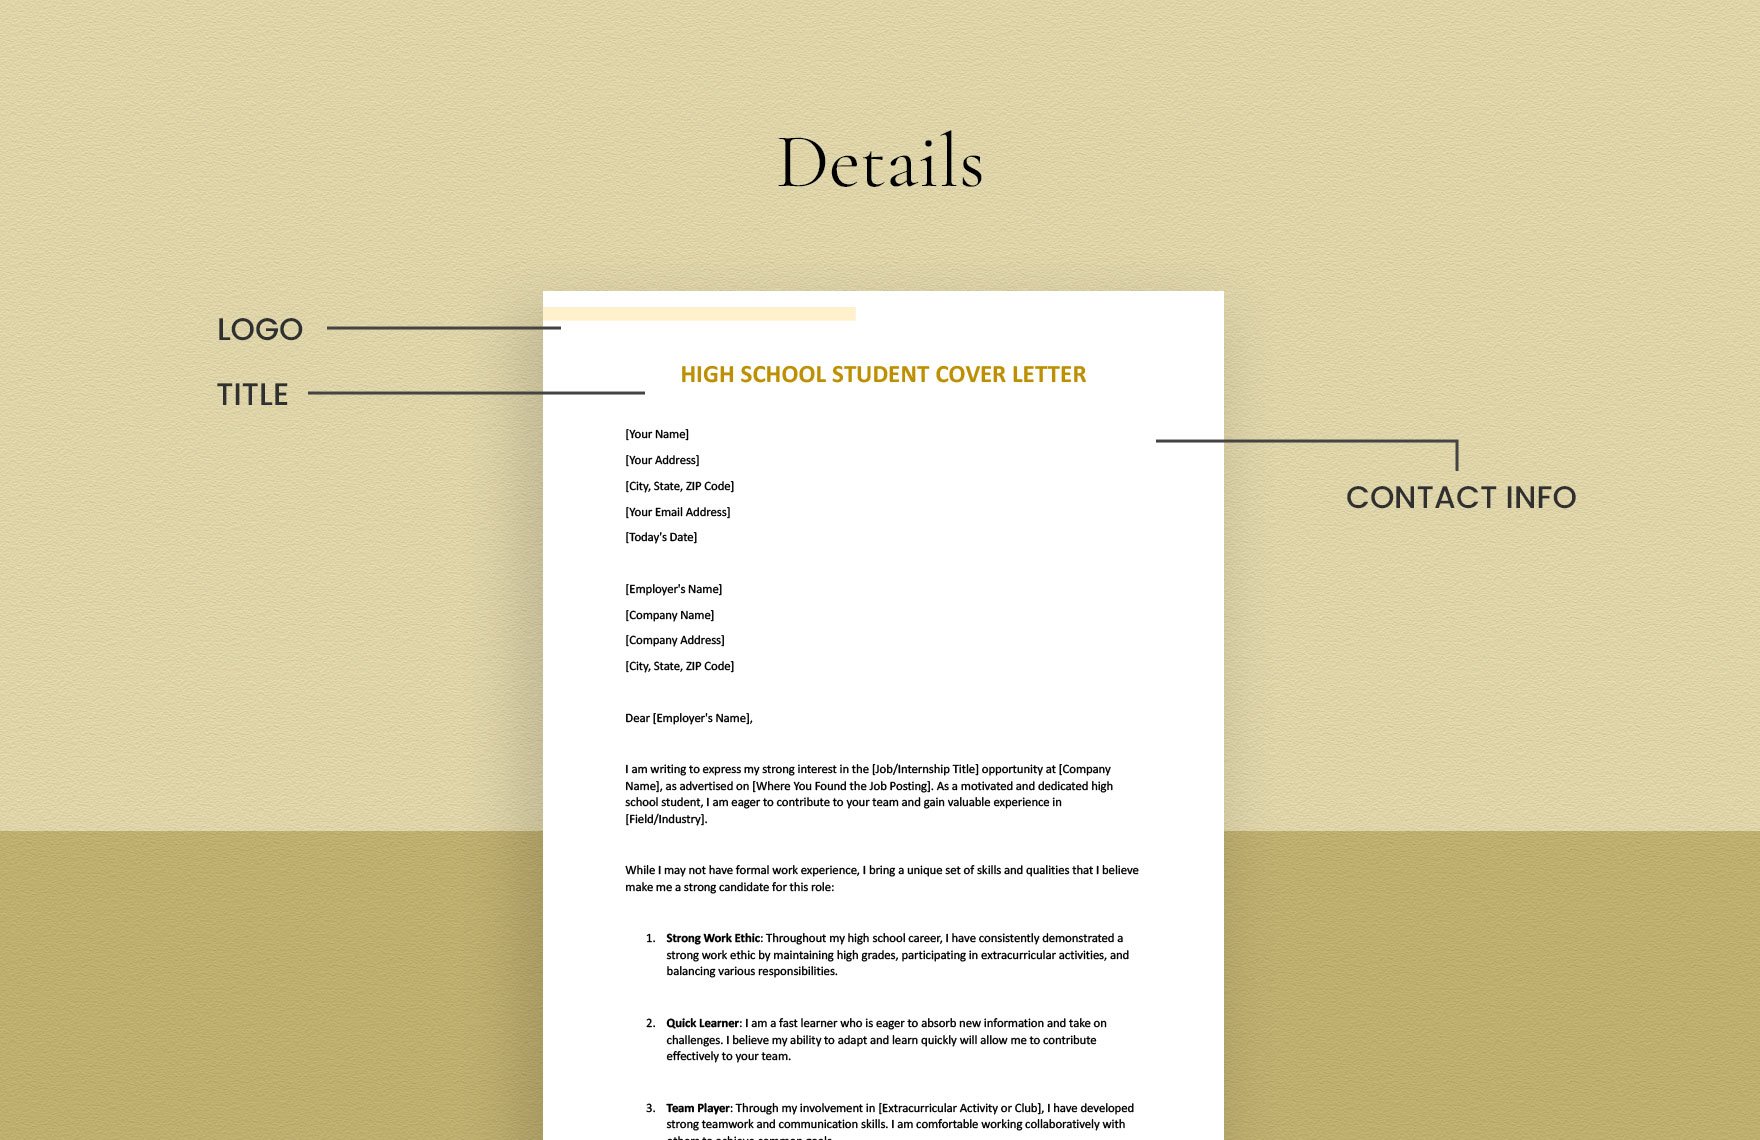 High school student cover letter